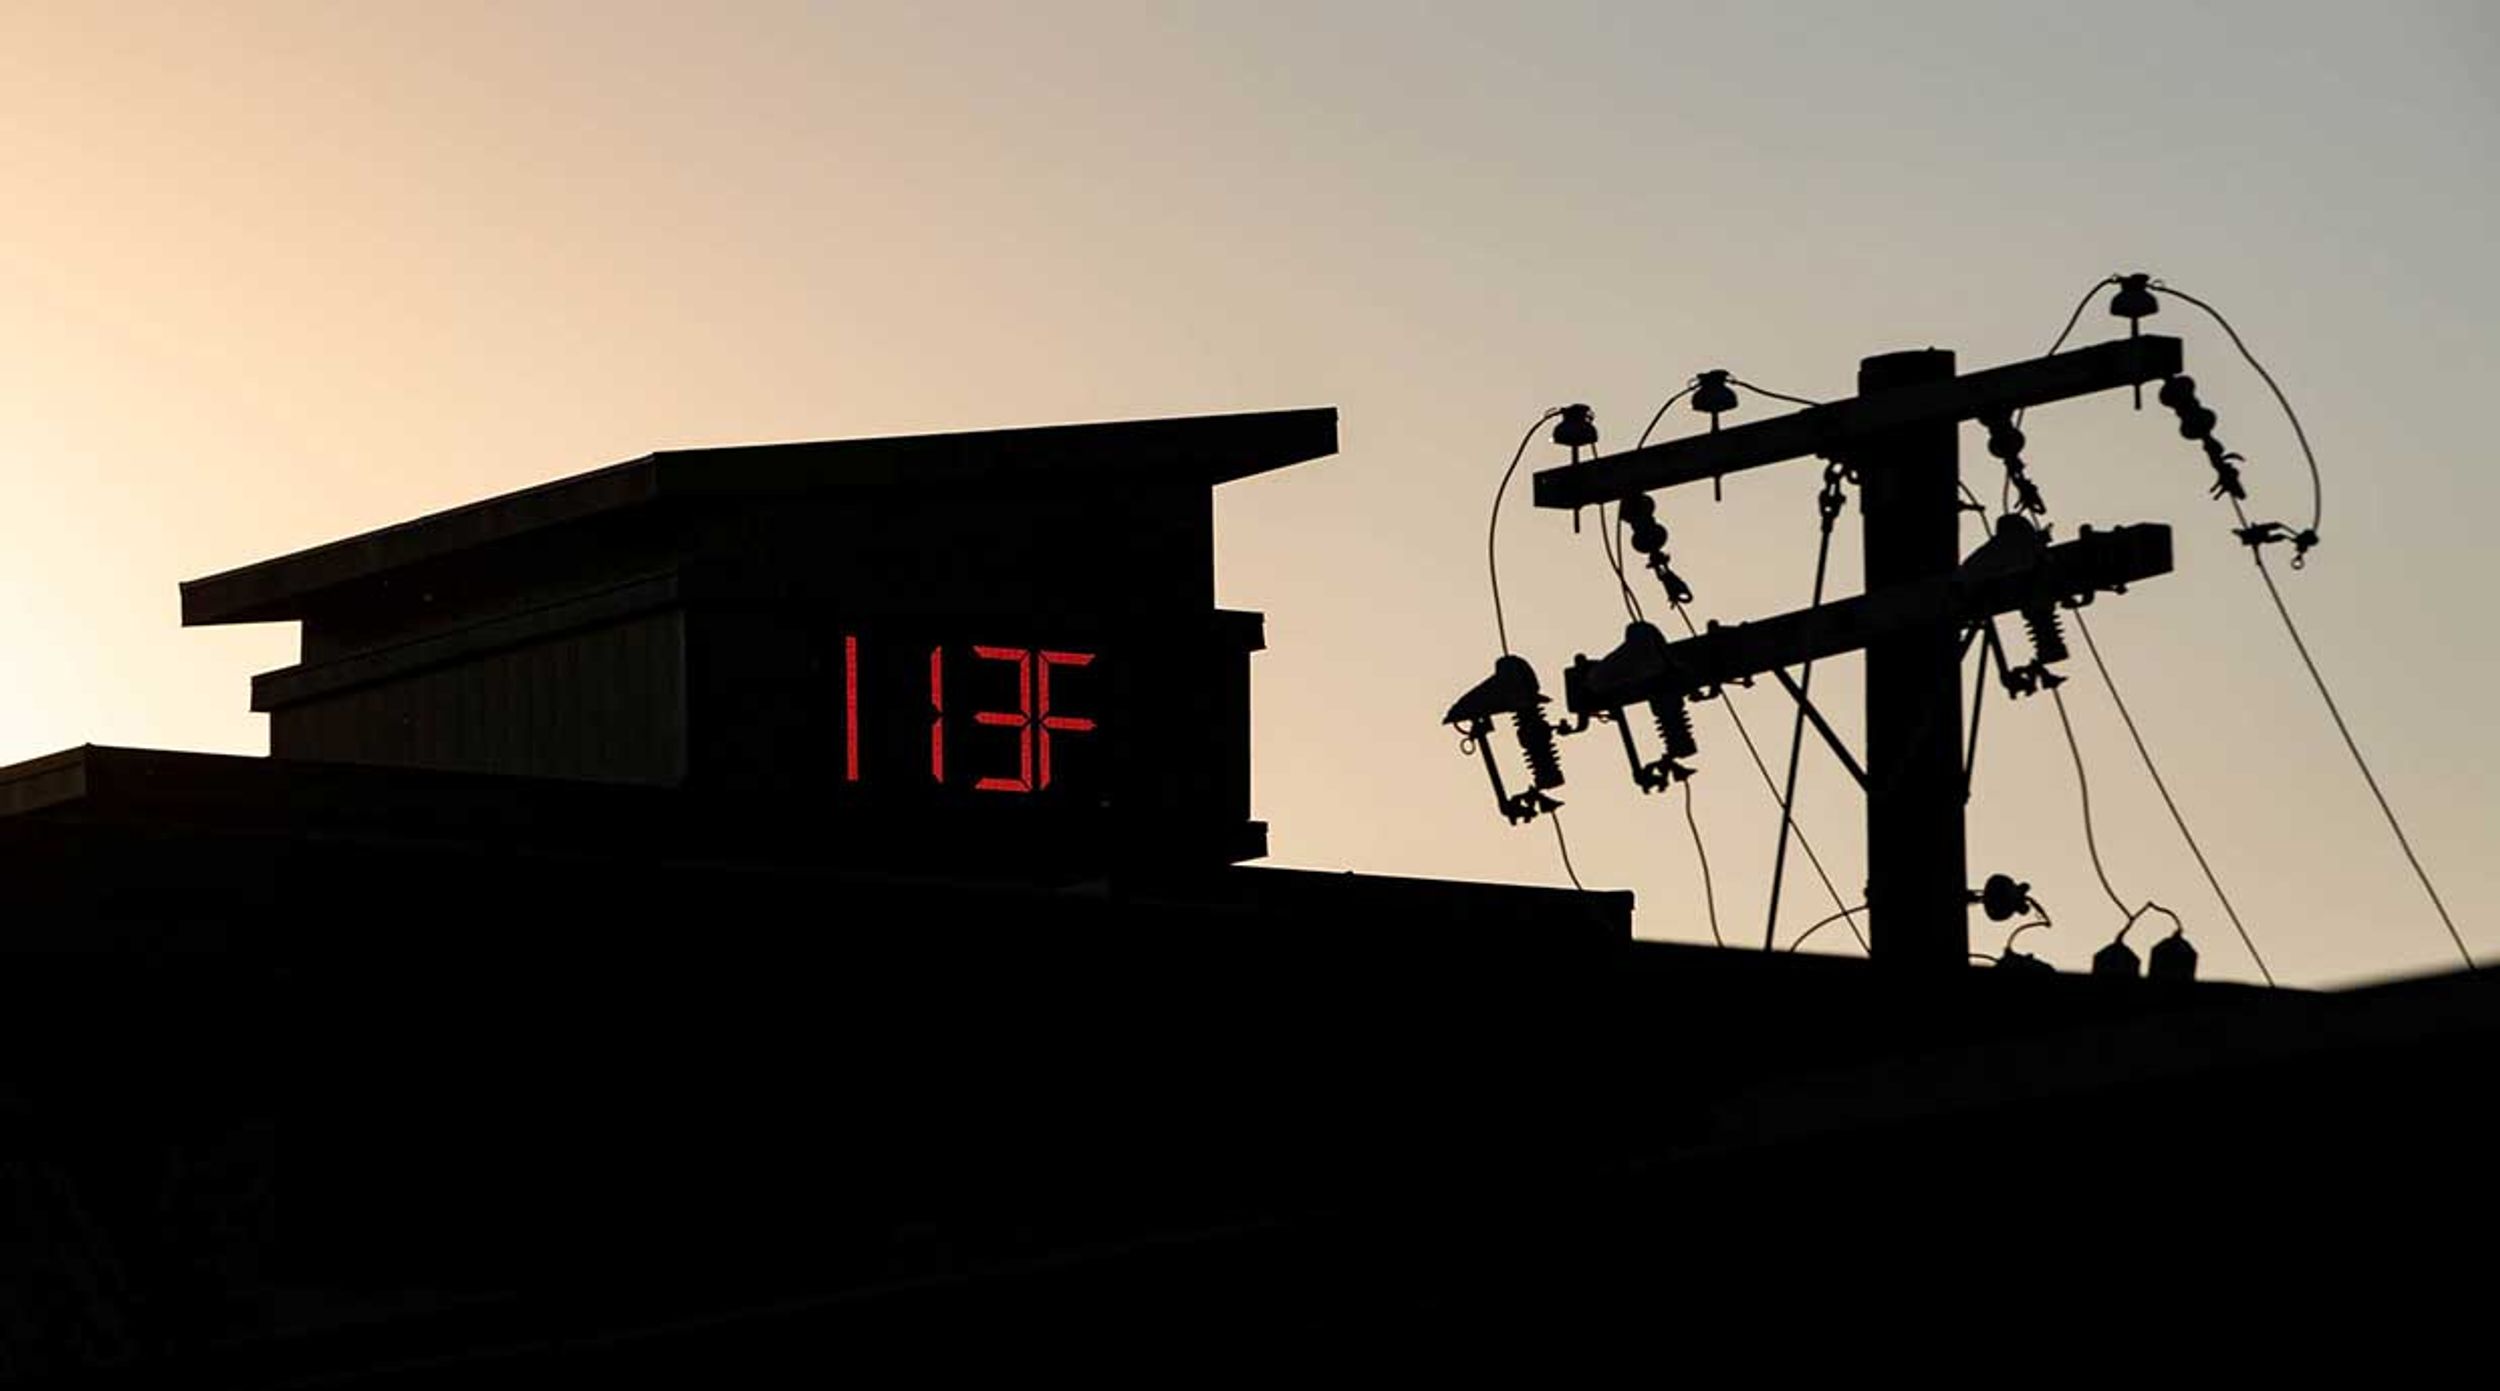 A thermometer reads 113 degrees Fahrenheit during a heat wave in Portland, Oregon, U.S. June 27, 2021.